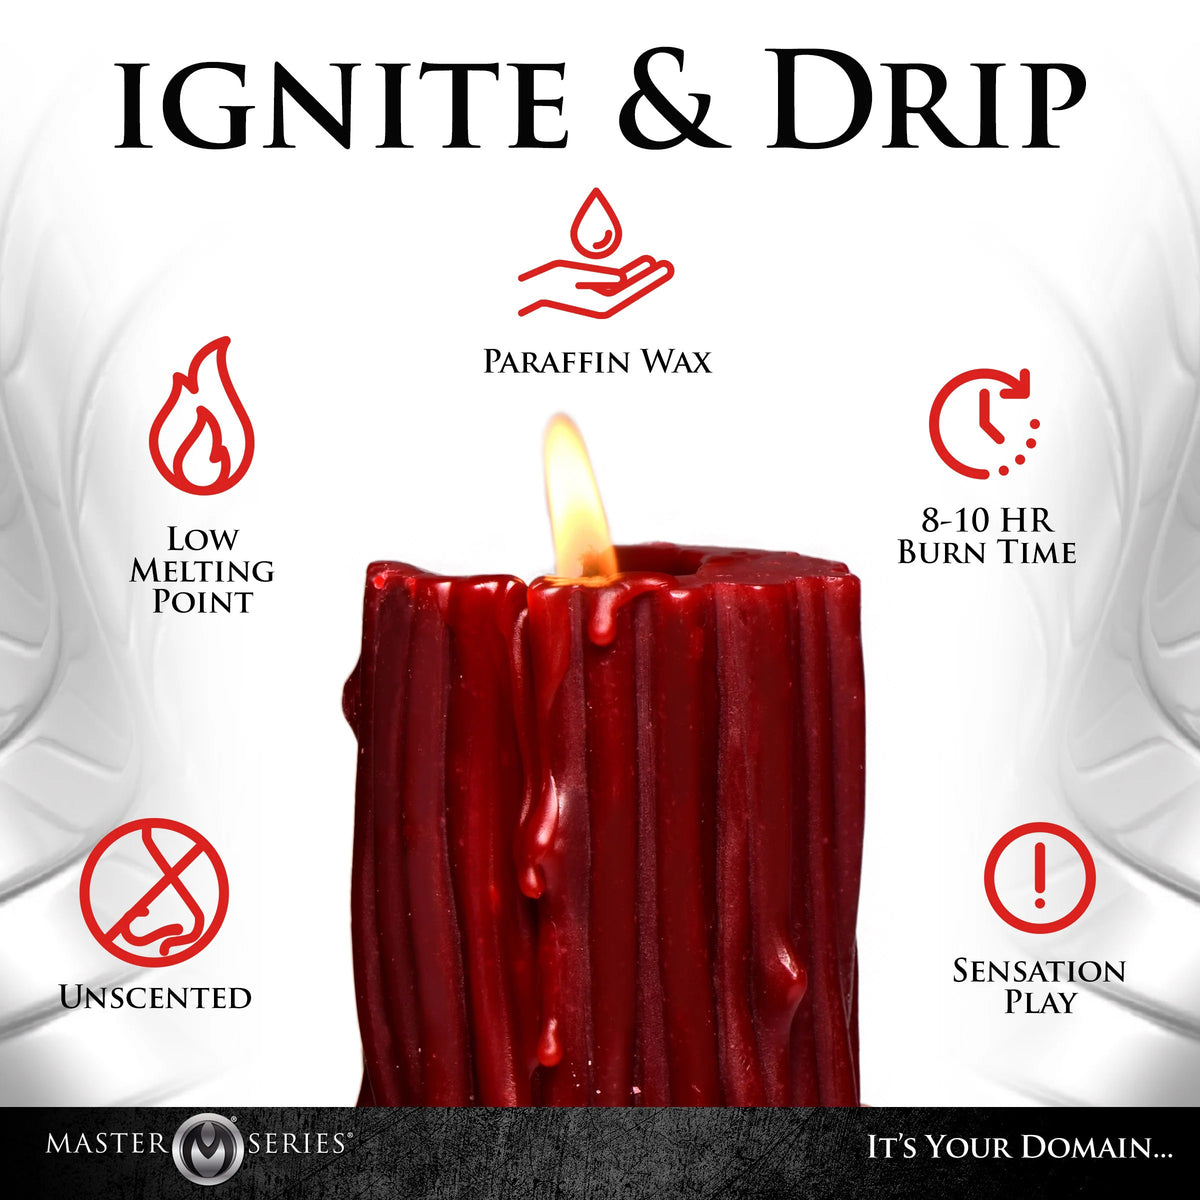 Thorn Drip Candle - Red